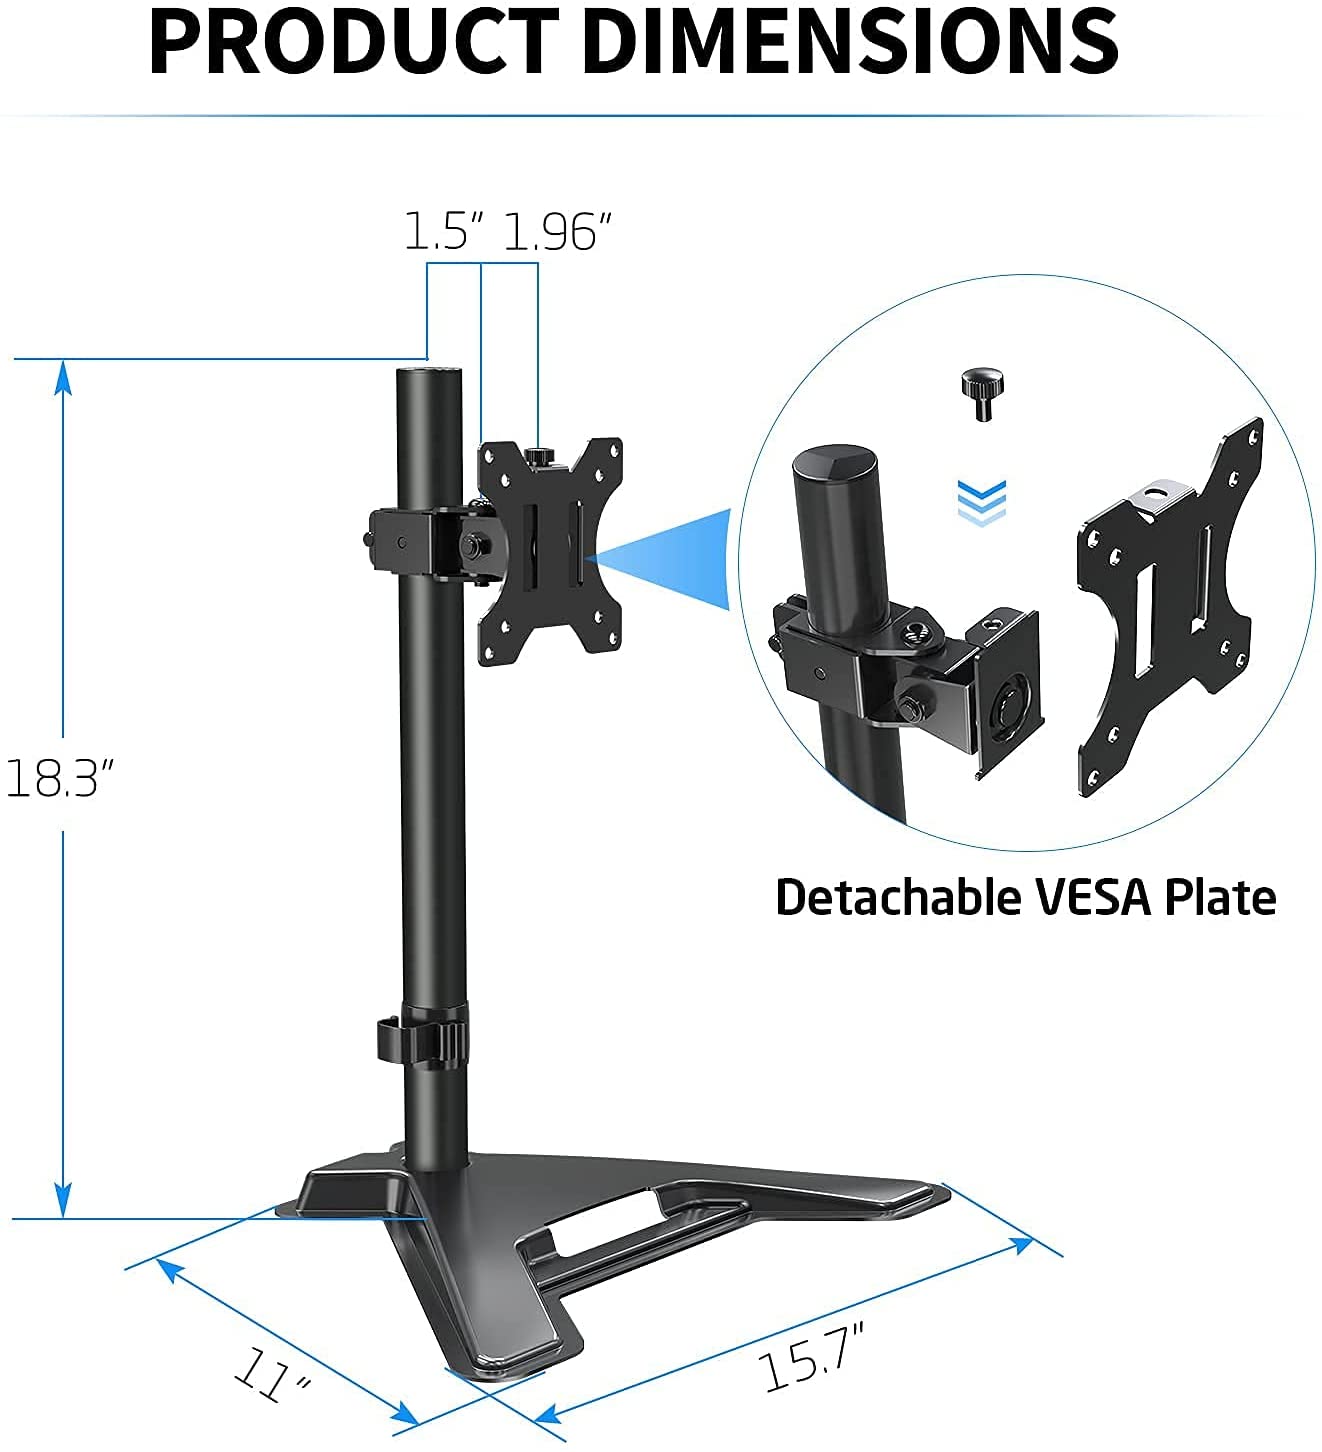 freestanding monitor desk stand with detachable VESA plate for easy installation